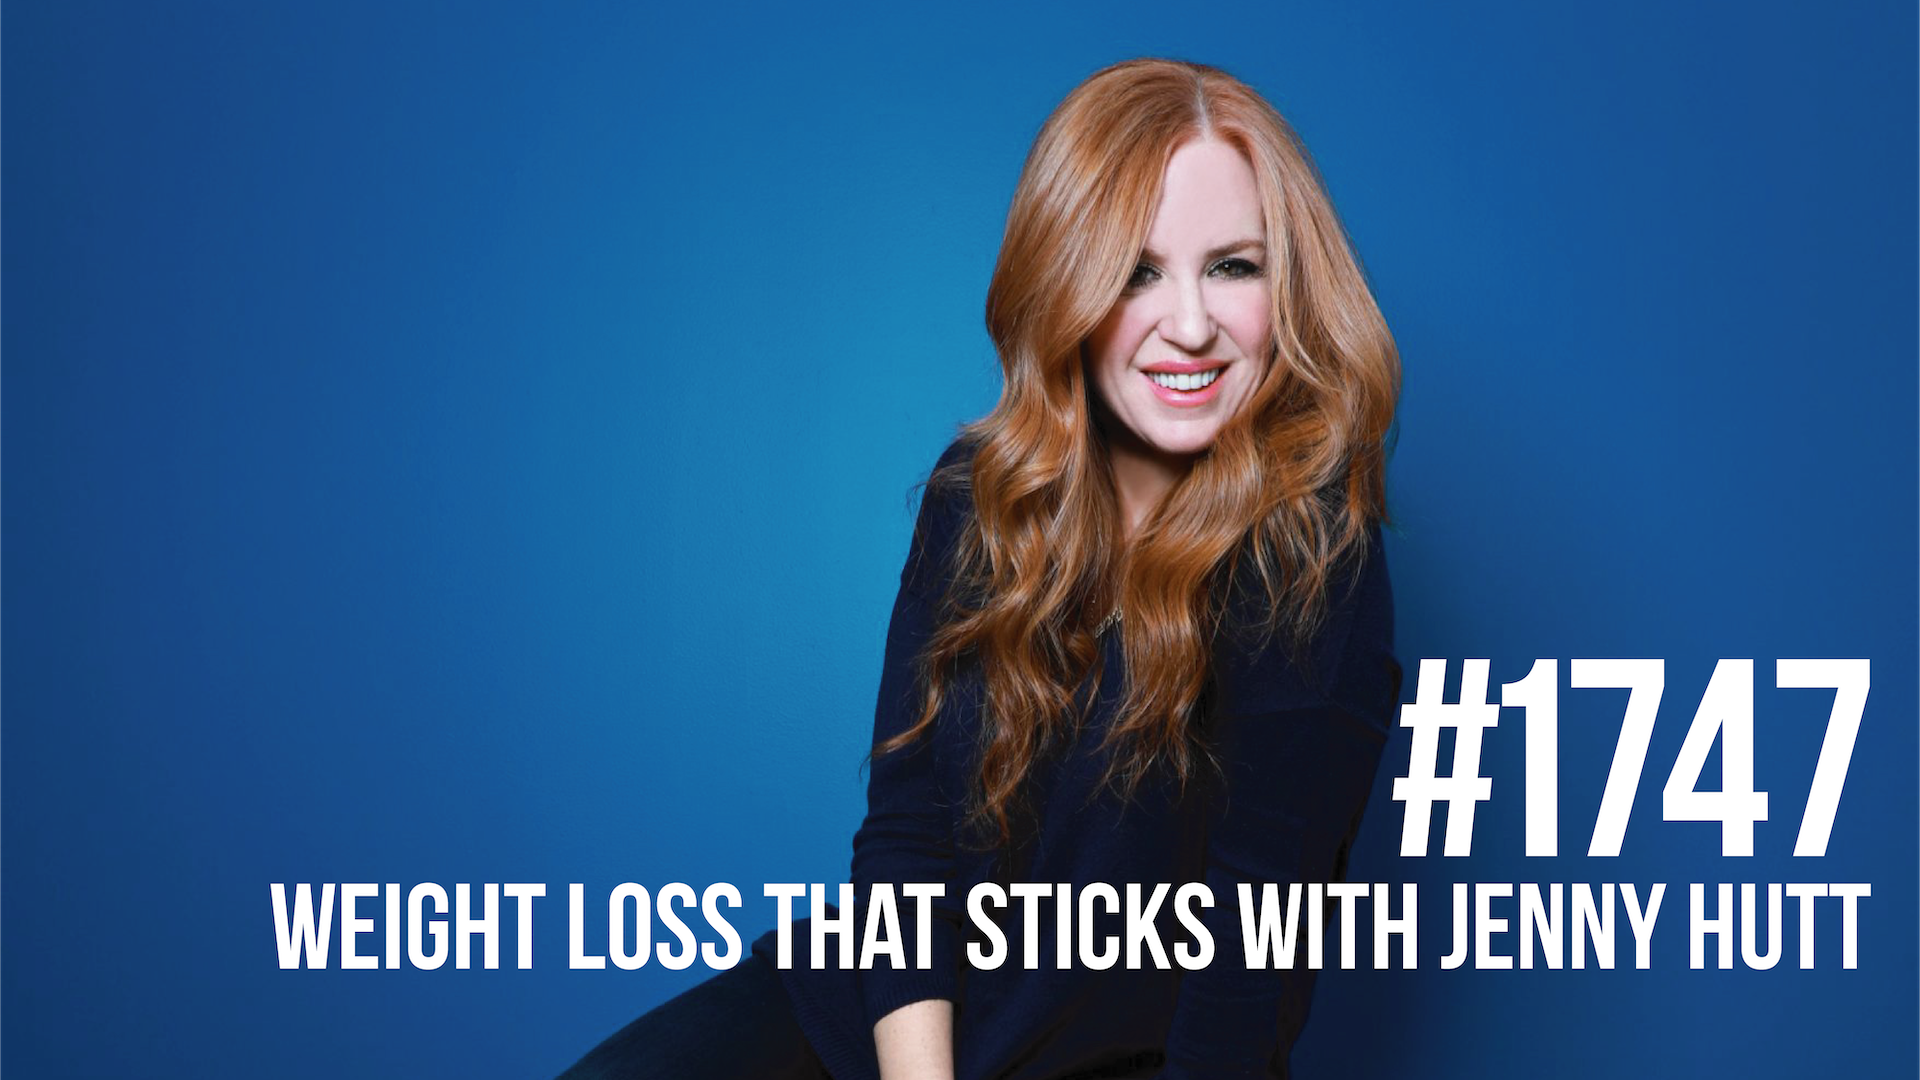 1747: Weight Loss That Sticks With Jenny Hutt